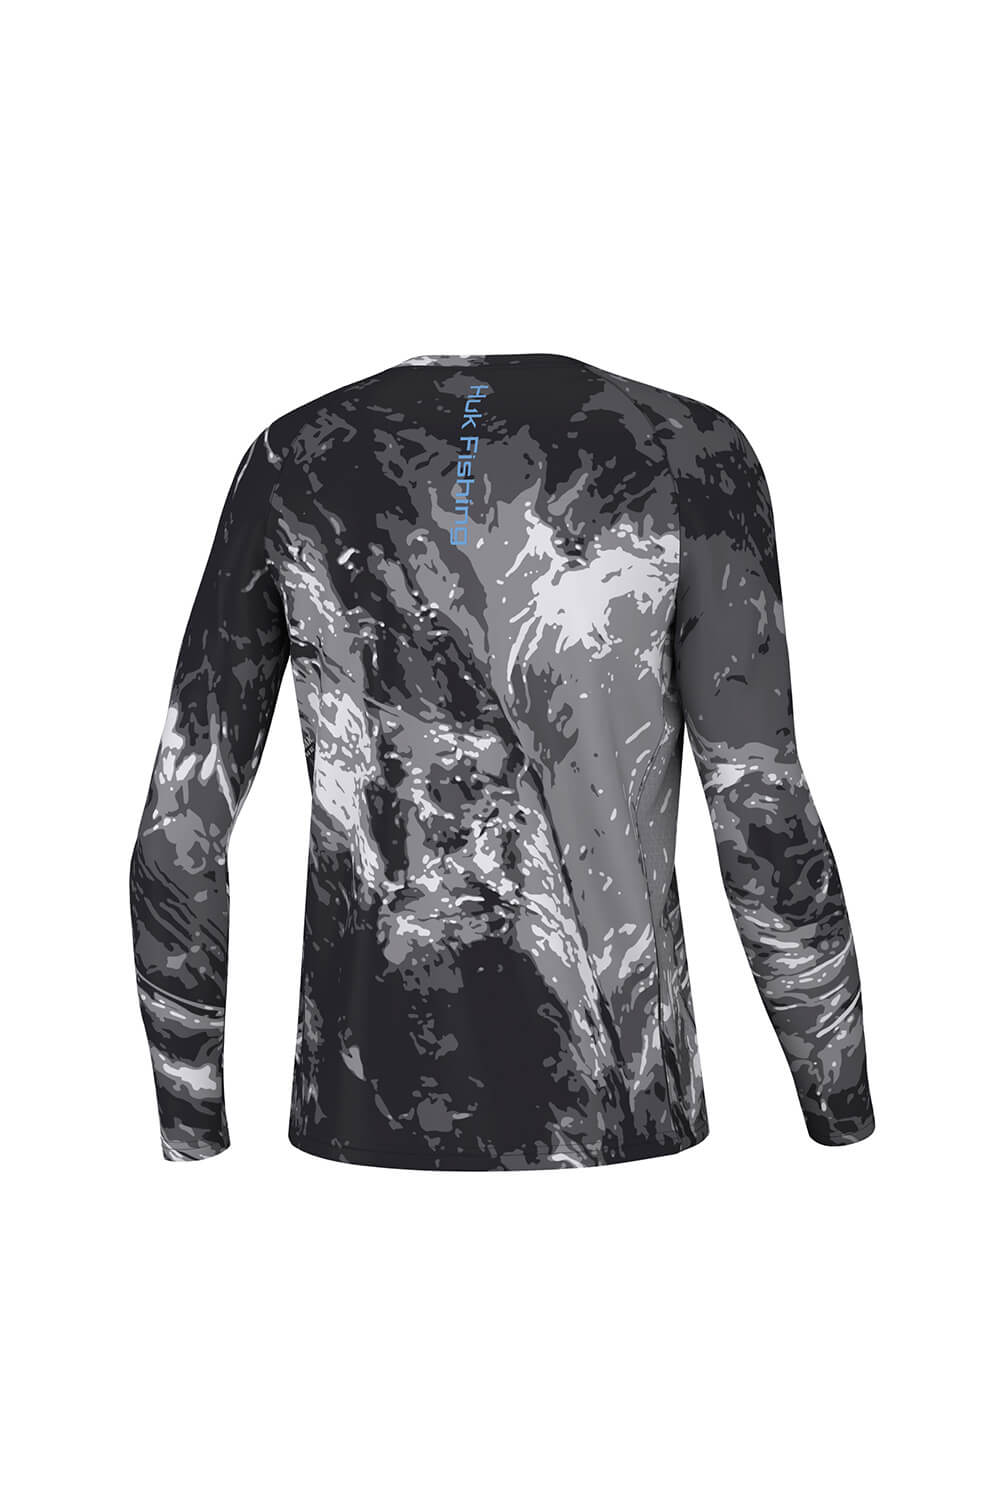 Huk Fishing Youth Pursuit Mossy Oak Crew Long Sleeve T-Shirt for